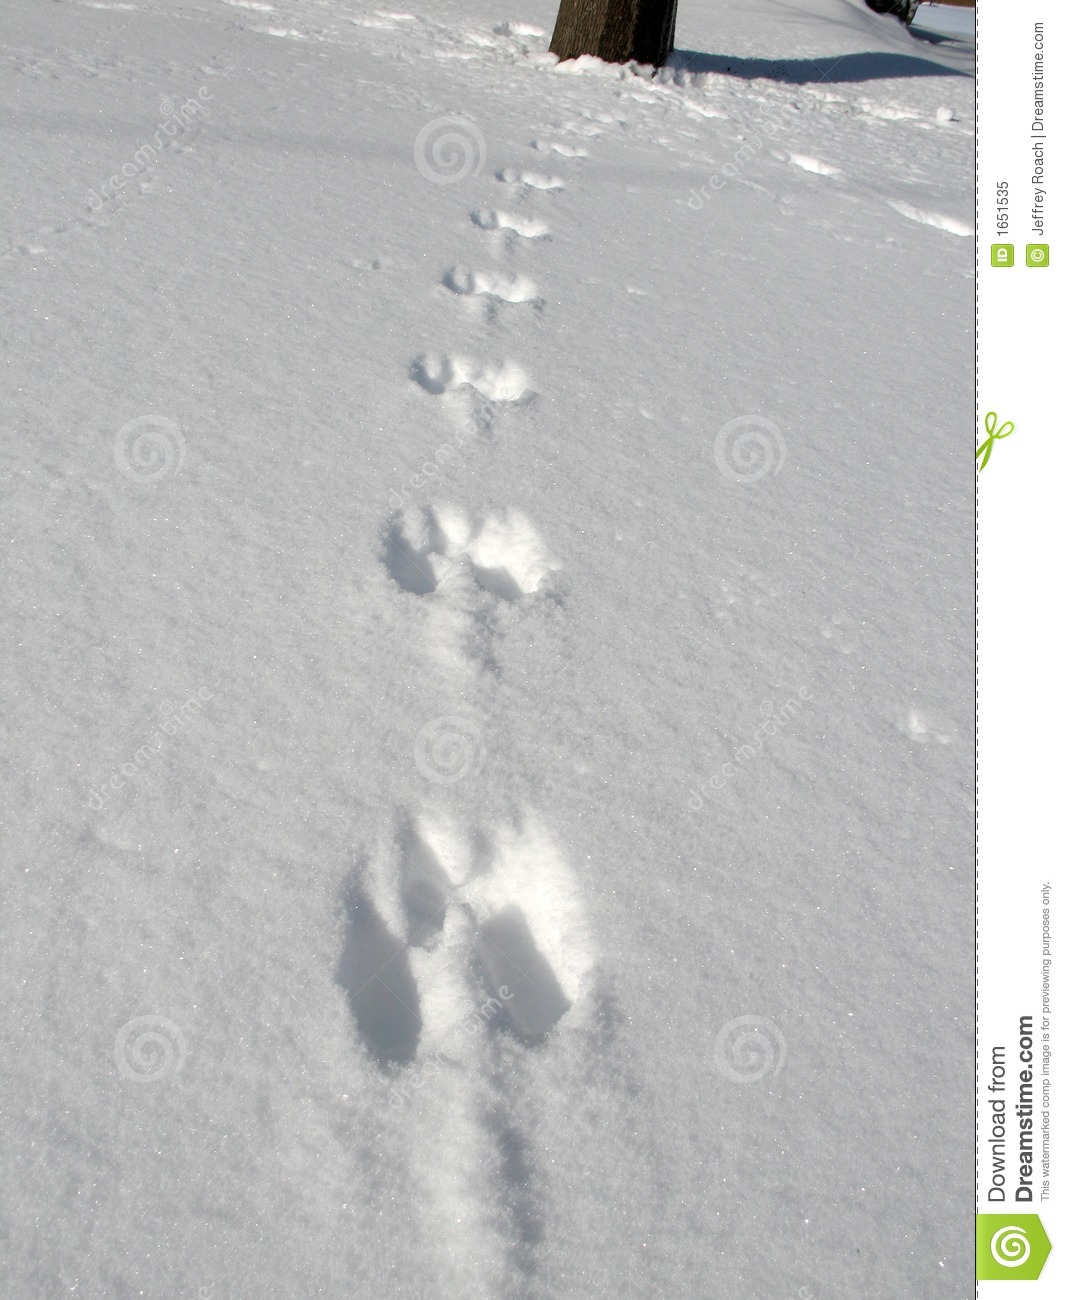 Squirrel Prints In Snow Royalty Free Stock Photo   Image  1651535